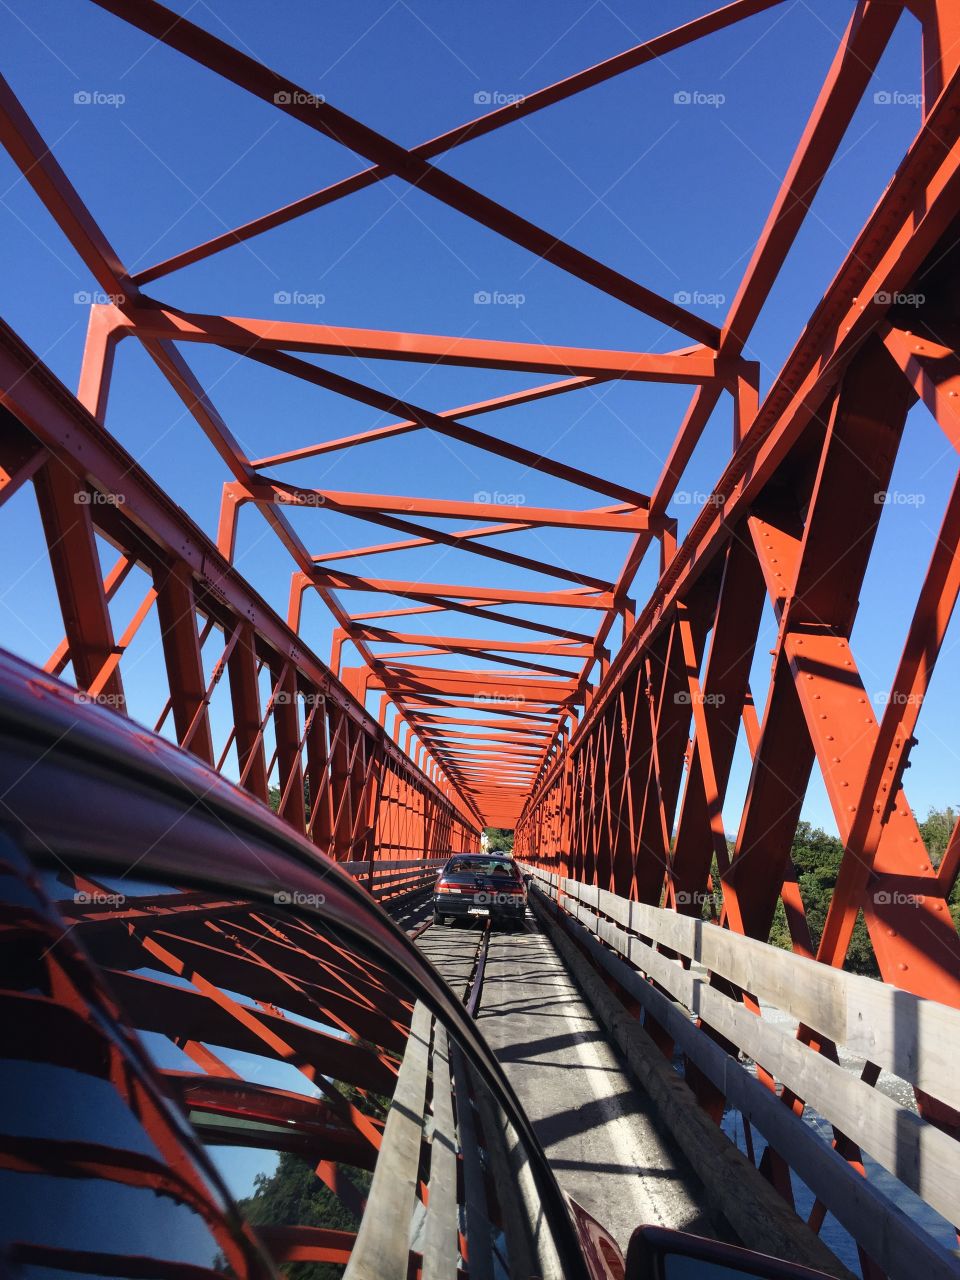 New Zealand Bridge . Our car was red and so was the bridge!